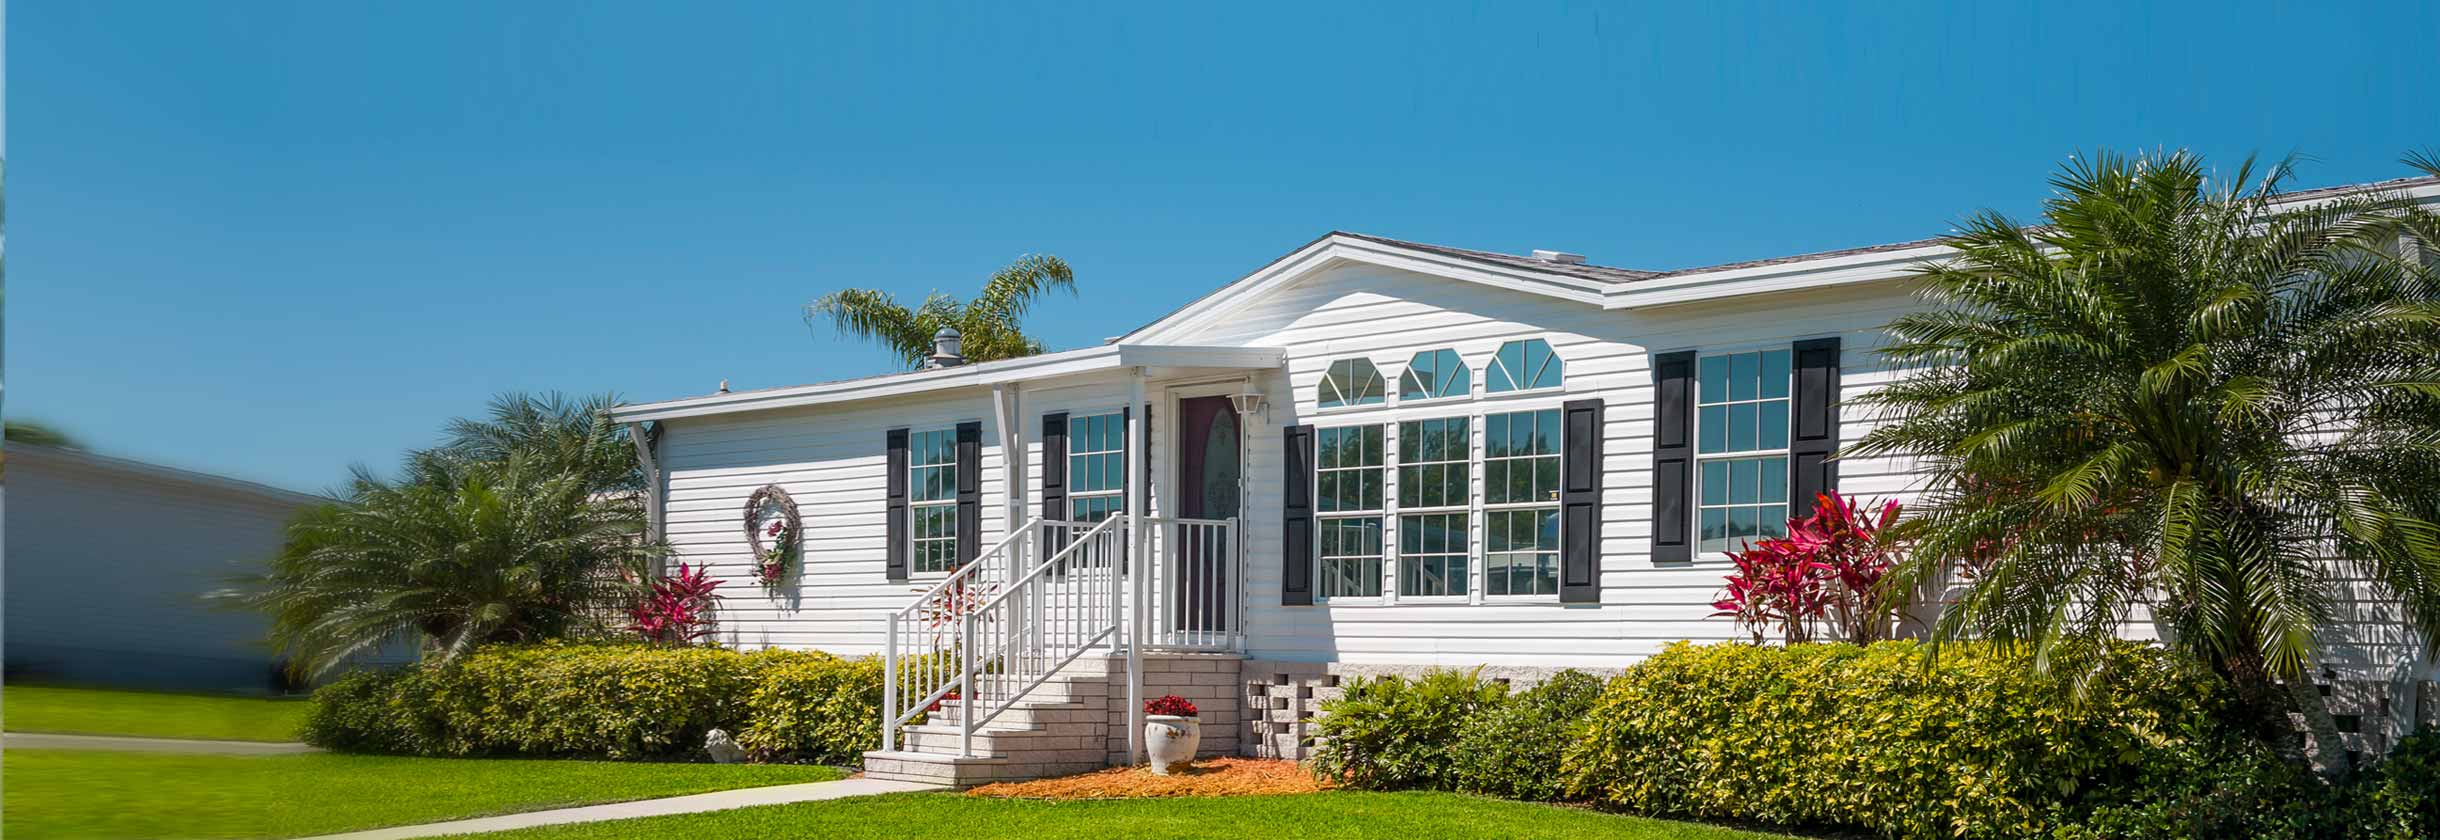 Manufactured Housing Loans